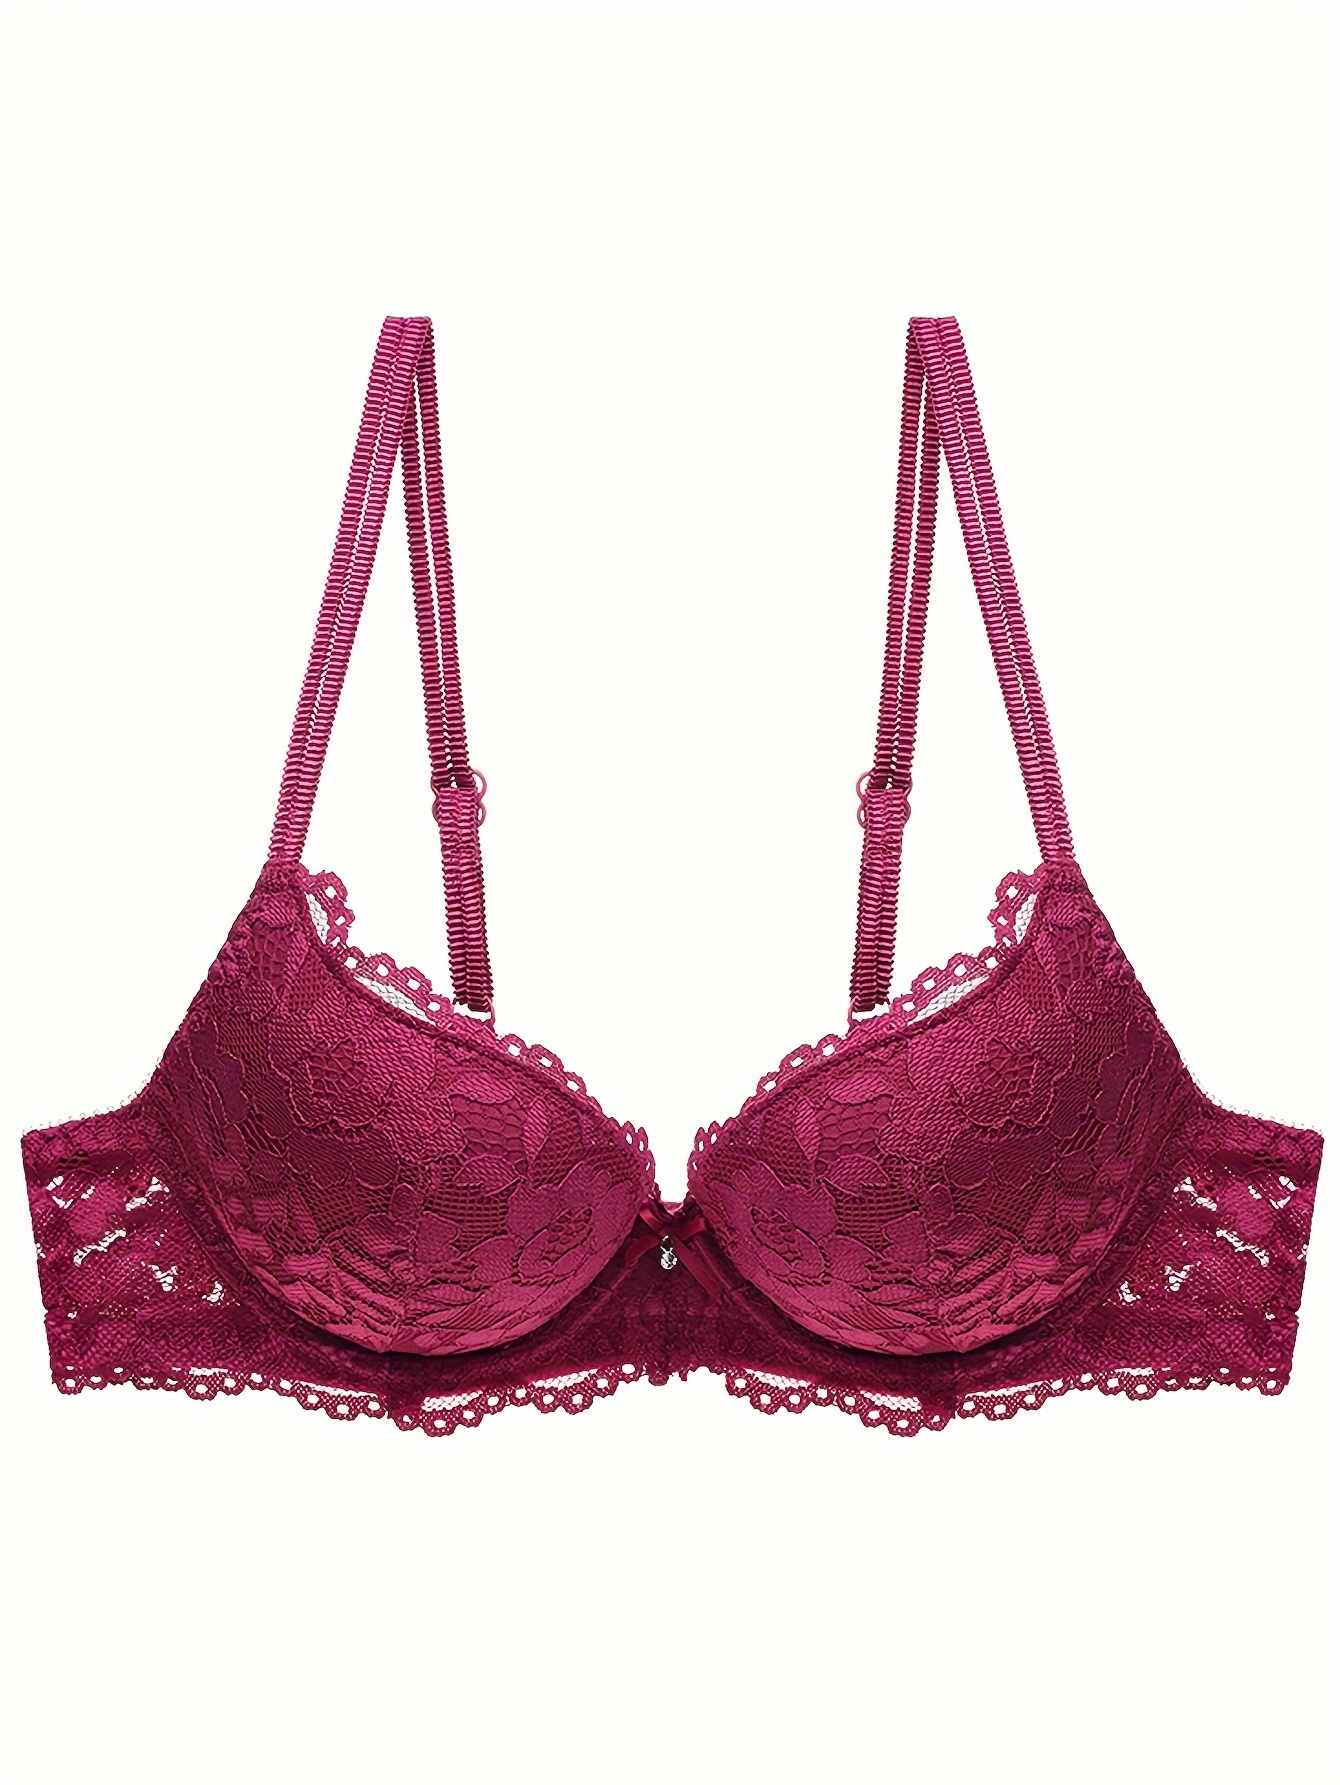 M S Padded Bra Cotton Rich Non-Wired Lace Trim Mulberry Comfort